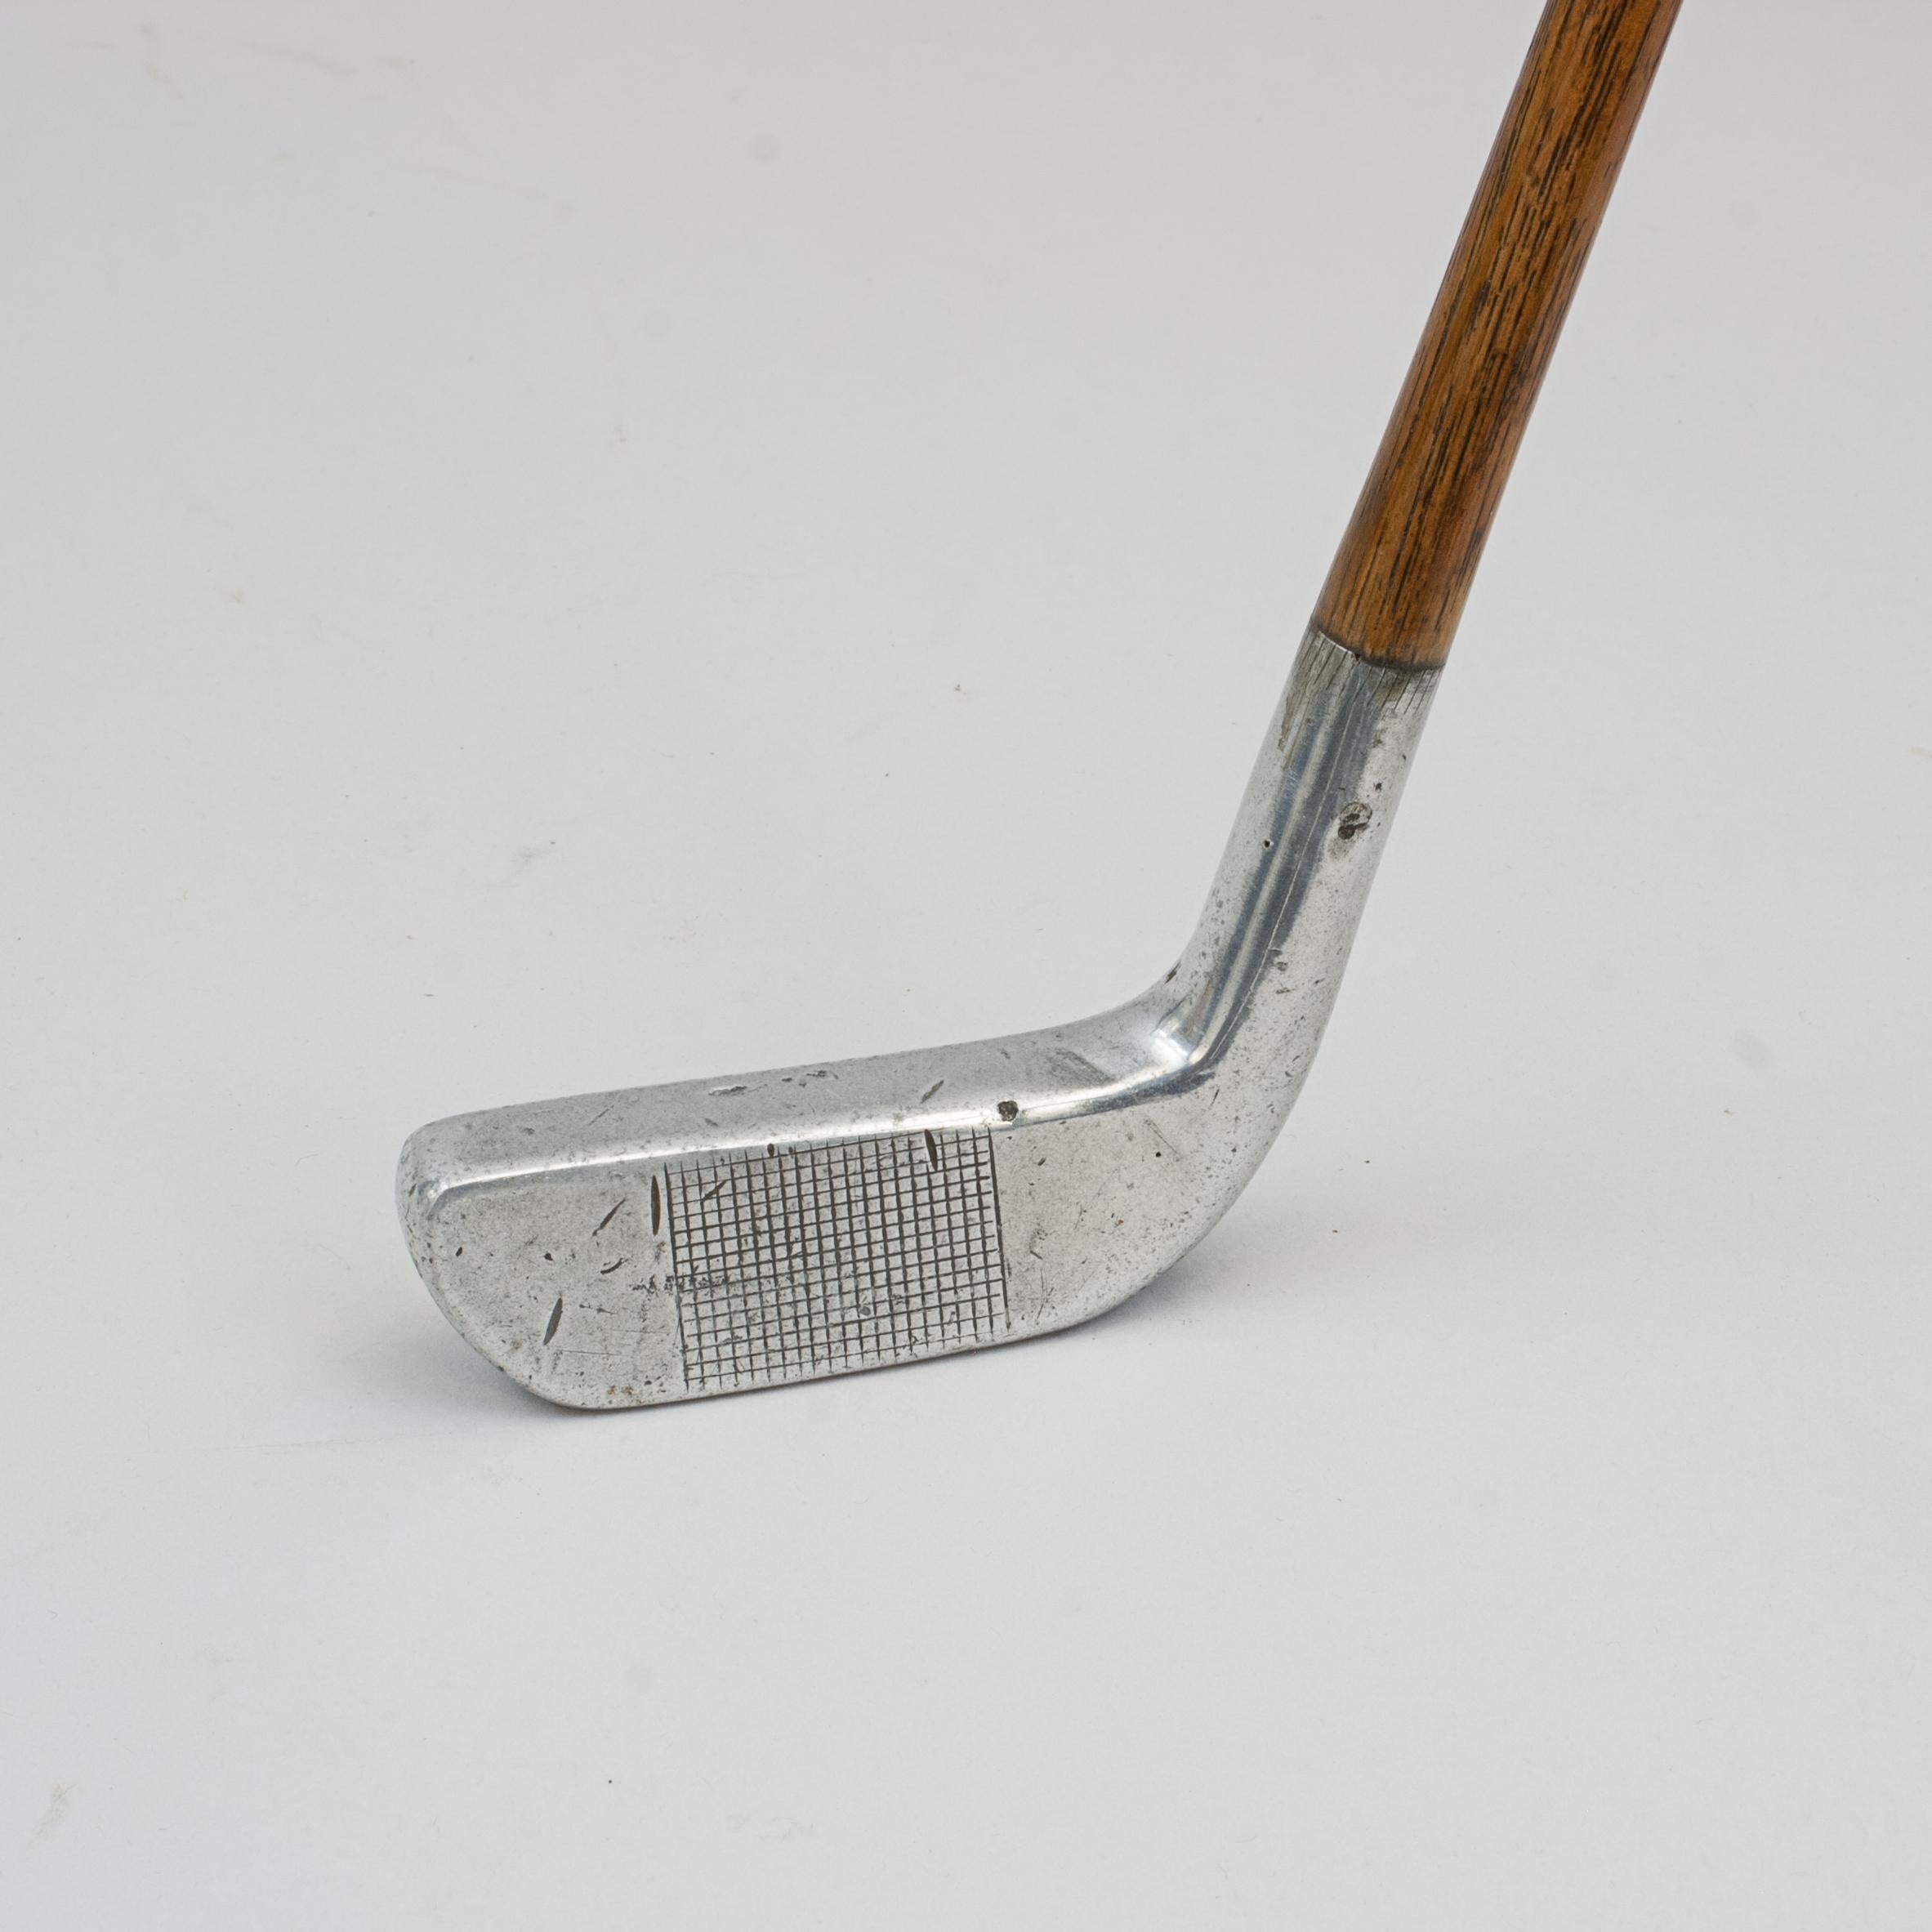 Vintage Golf Club, Hickory Shafted Aluminium Putter 3